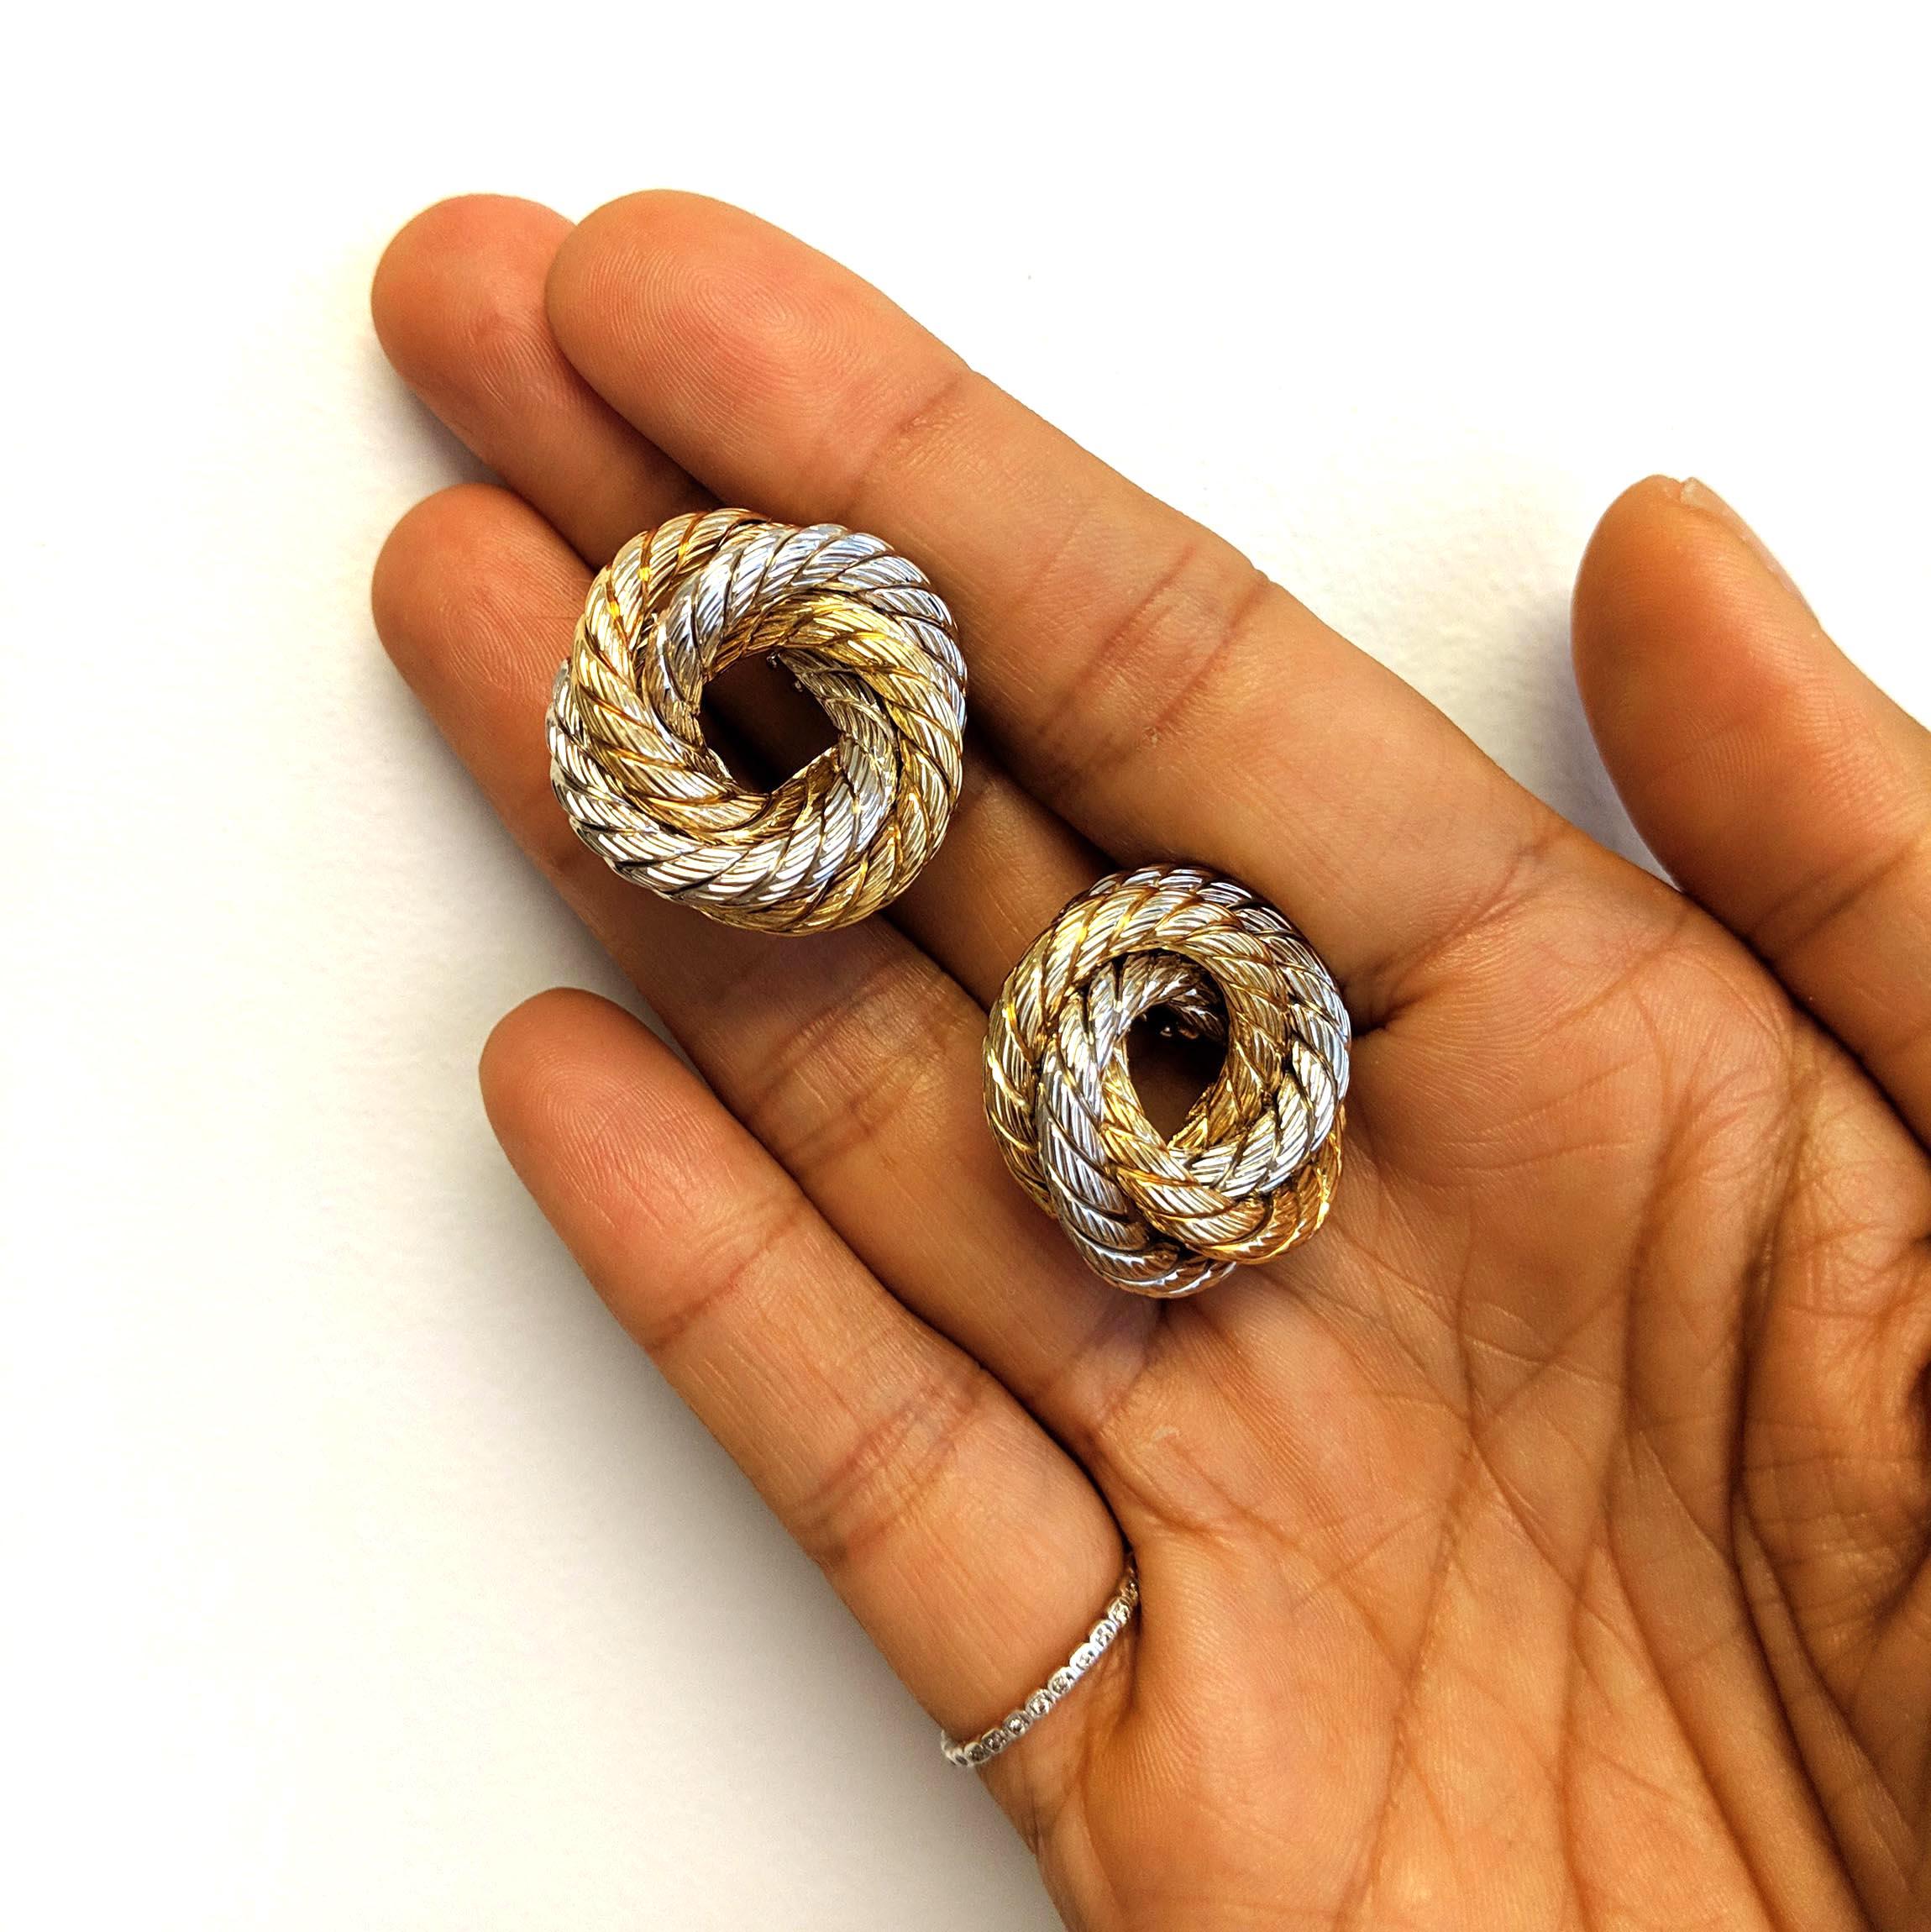 A torsade swirl design featuring contrasting white and yellow 18k gold. These earrings do not have posts, but the design does have room to accommodate them. We do not offer this service, but it is an easy request to a jeweler. 

* More photos by